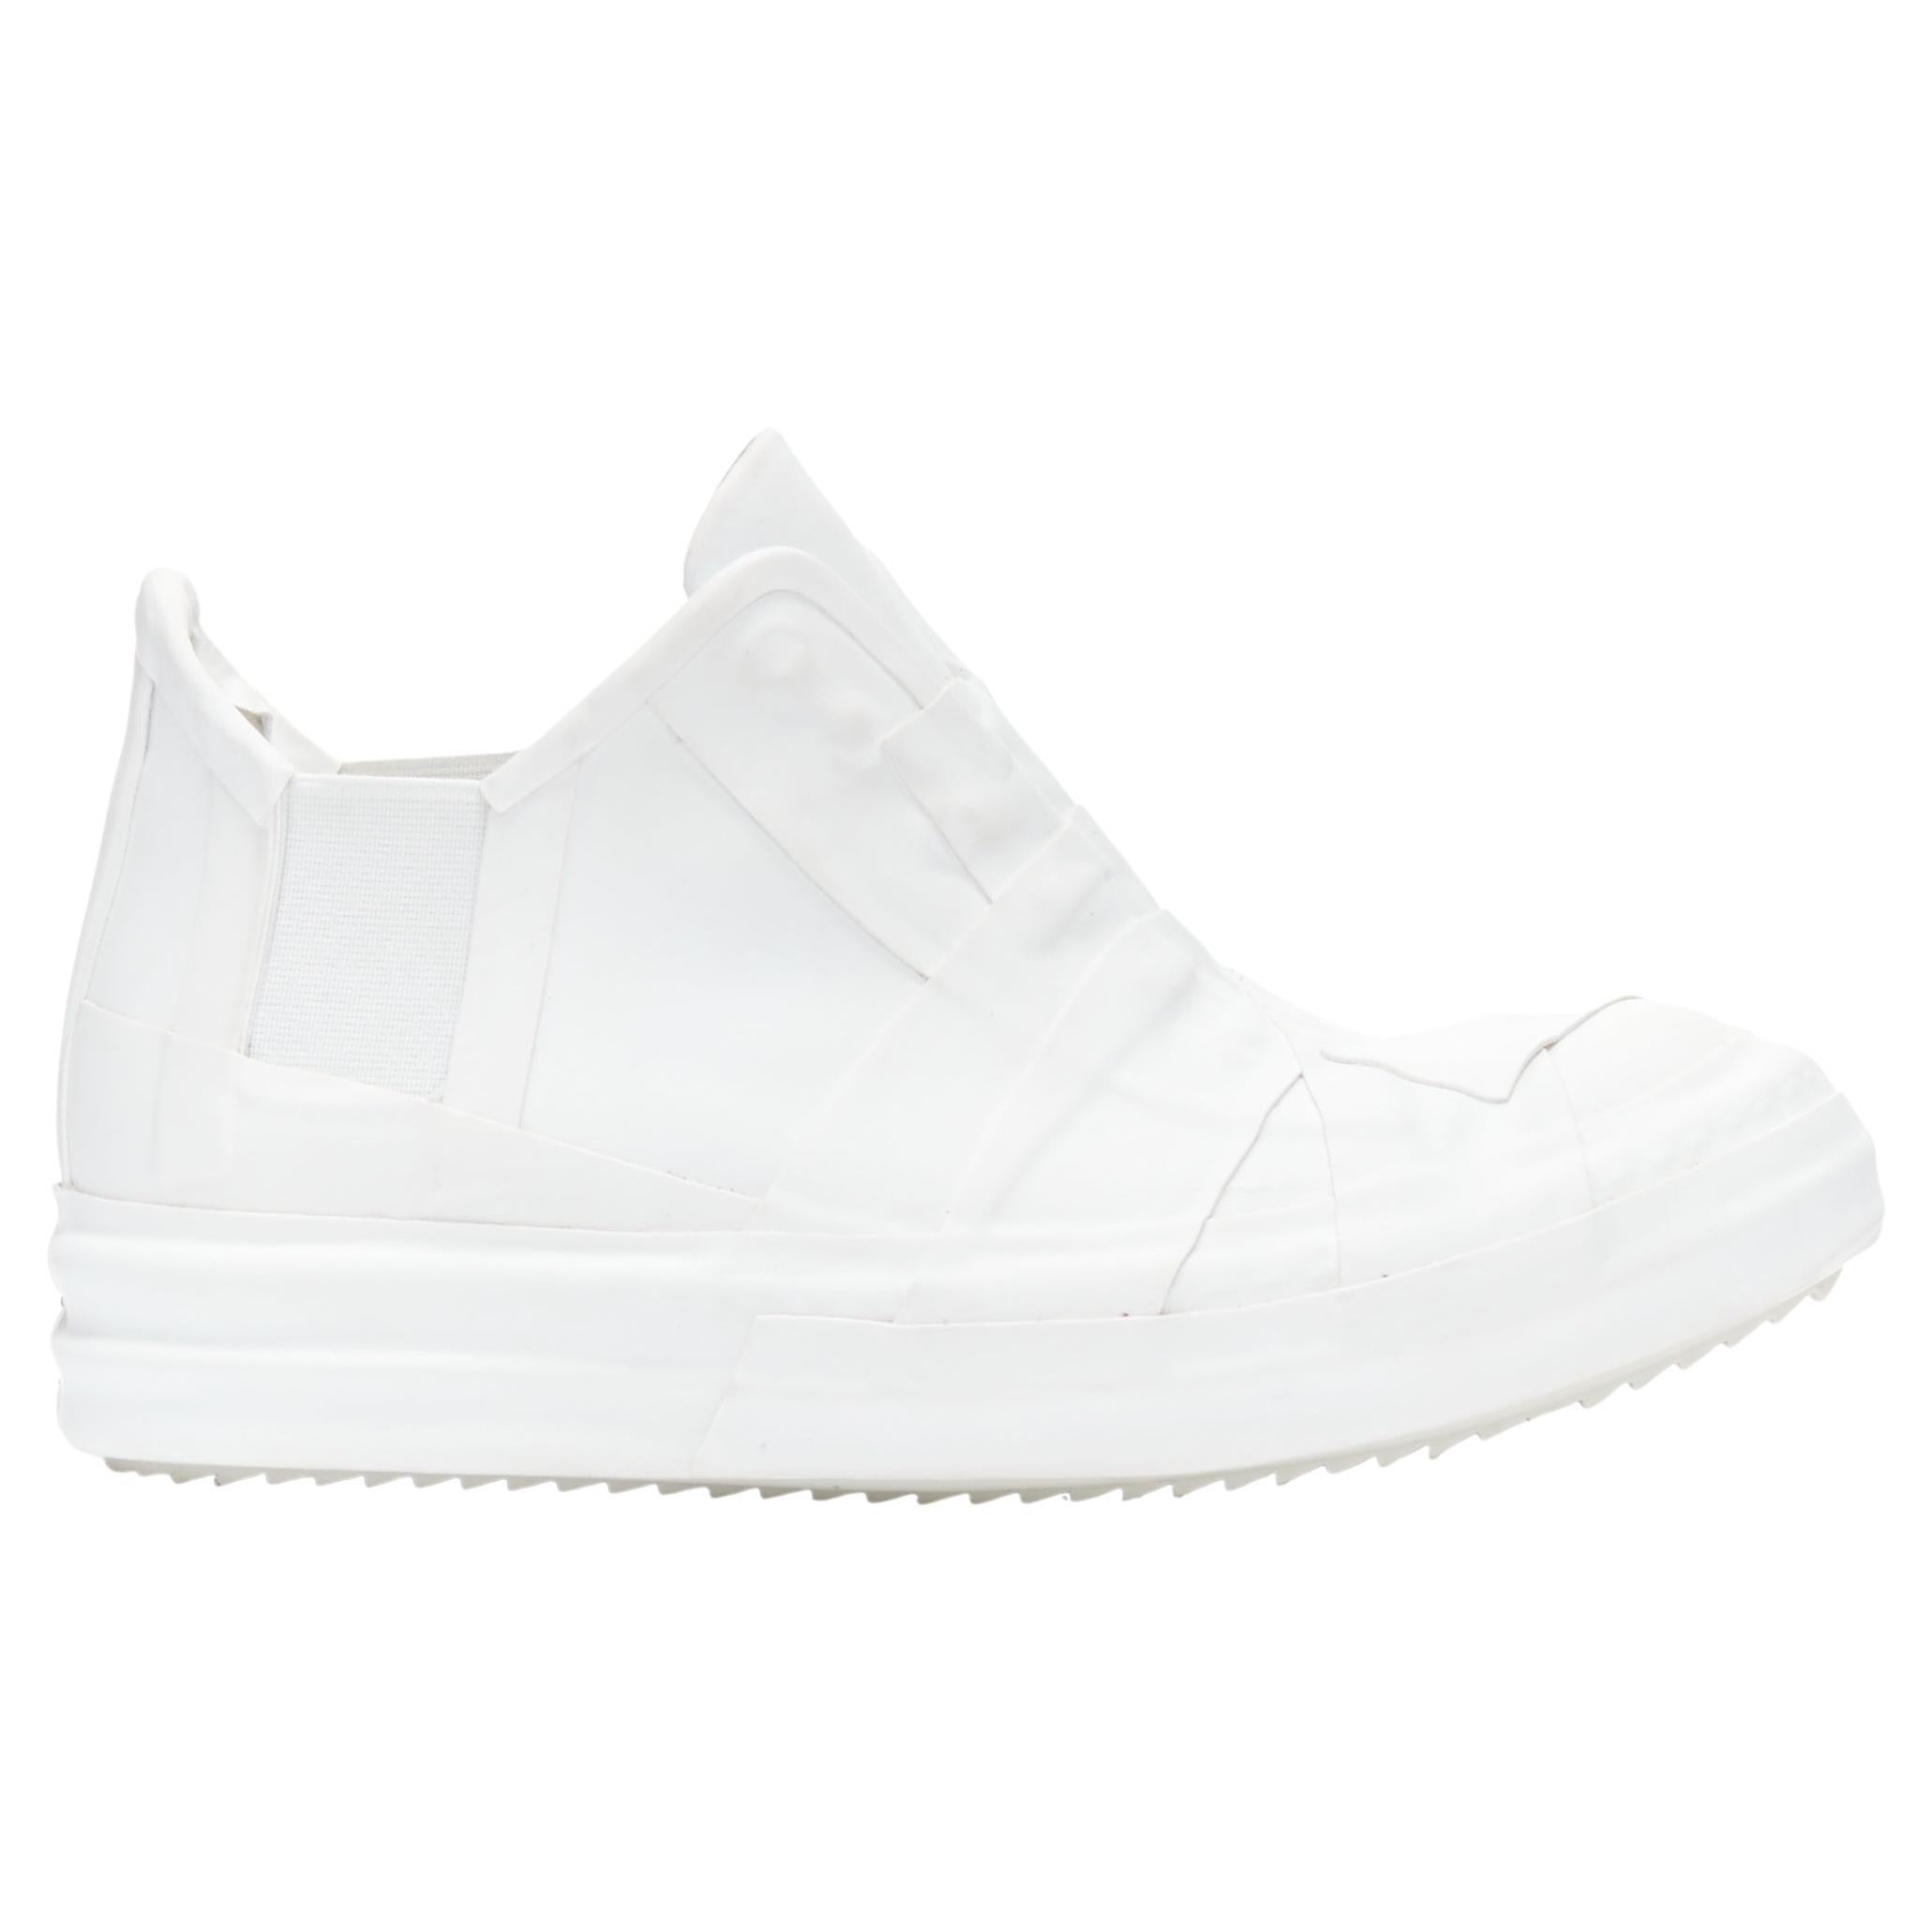 new RICK OWENS Geobasket Mummy Plaster wrapped white mid top sneaker EU36 For Sale